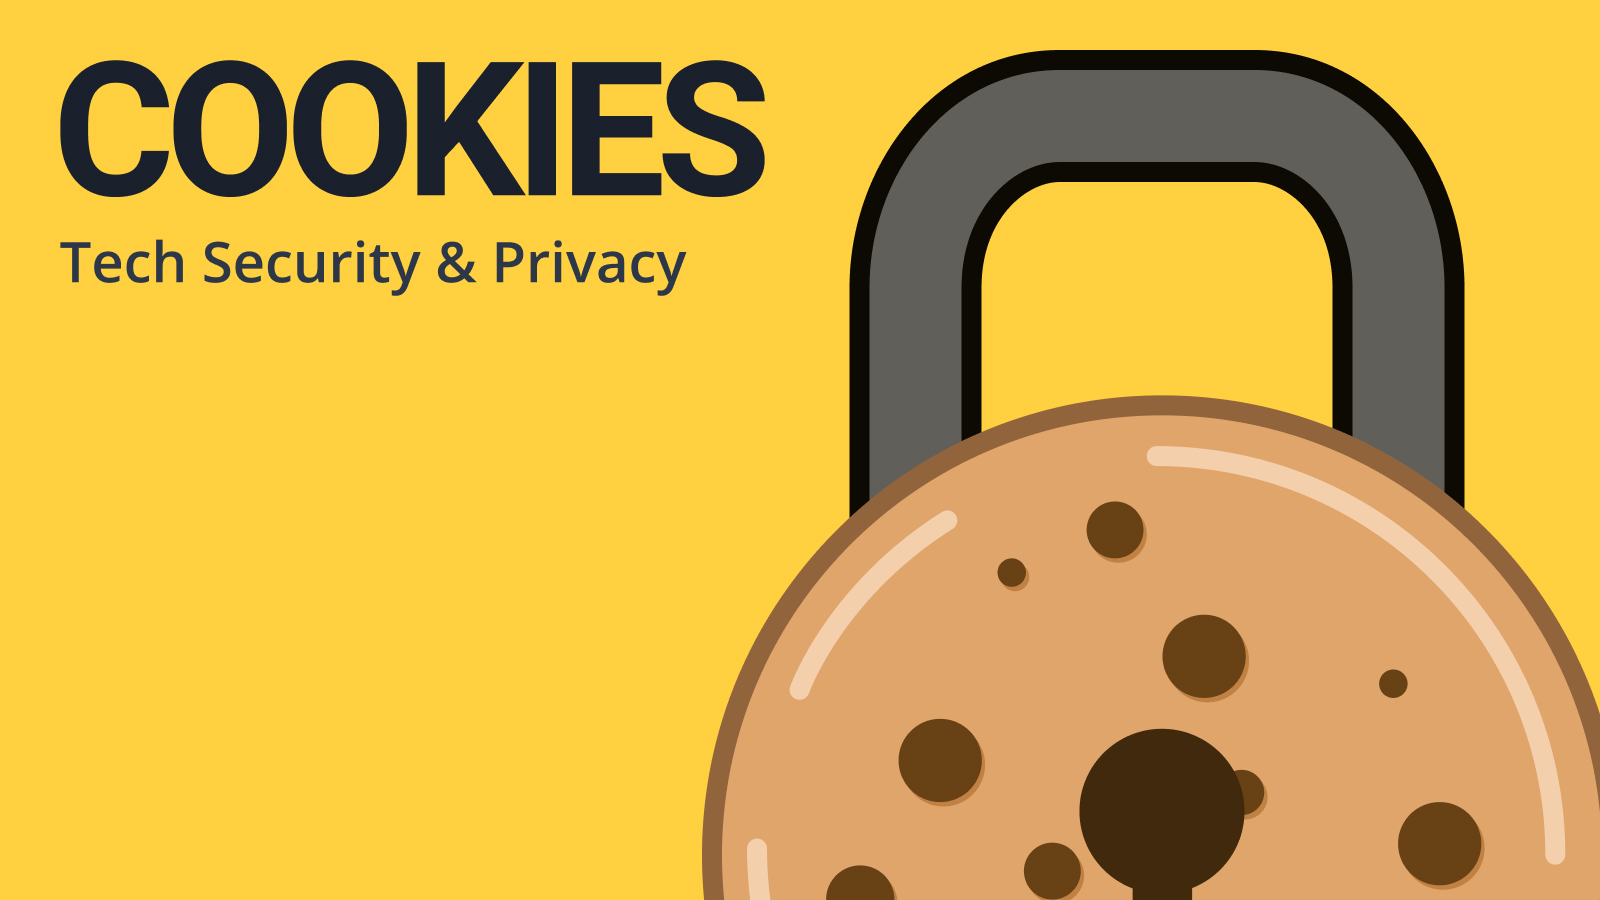 Simple illustration of a chocolate chip cookie with a metal padlock top and keyhole.  The text next to the cookie padlock reads "Cookies, tech security and policy".